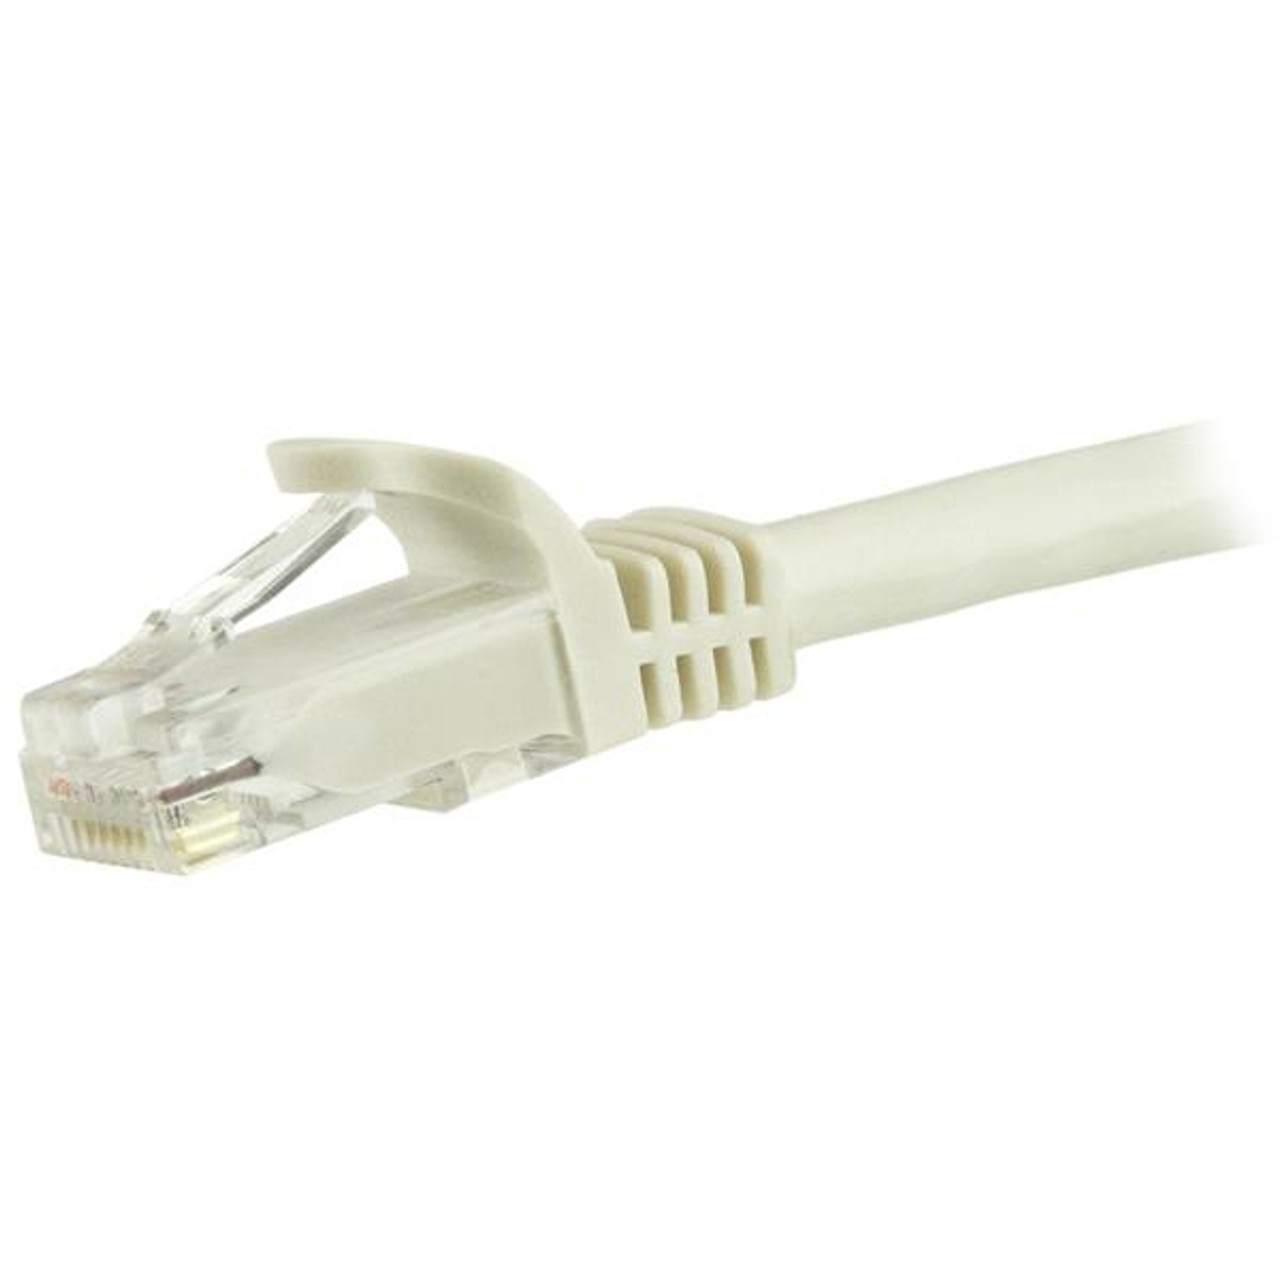 StarTech.com 1.5m CAT6 Ethernet Cable - White CAT 6 Gigabit Ethernet Wire -650MHz 100W PoE RJ45 UTP Network/Patch Cord Snagless w/Strain Relief Fluke Tested/Wiring is UL Certified/TIA